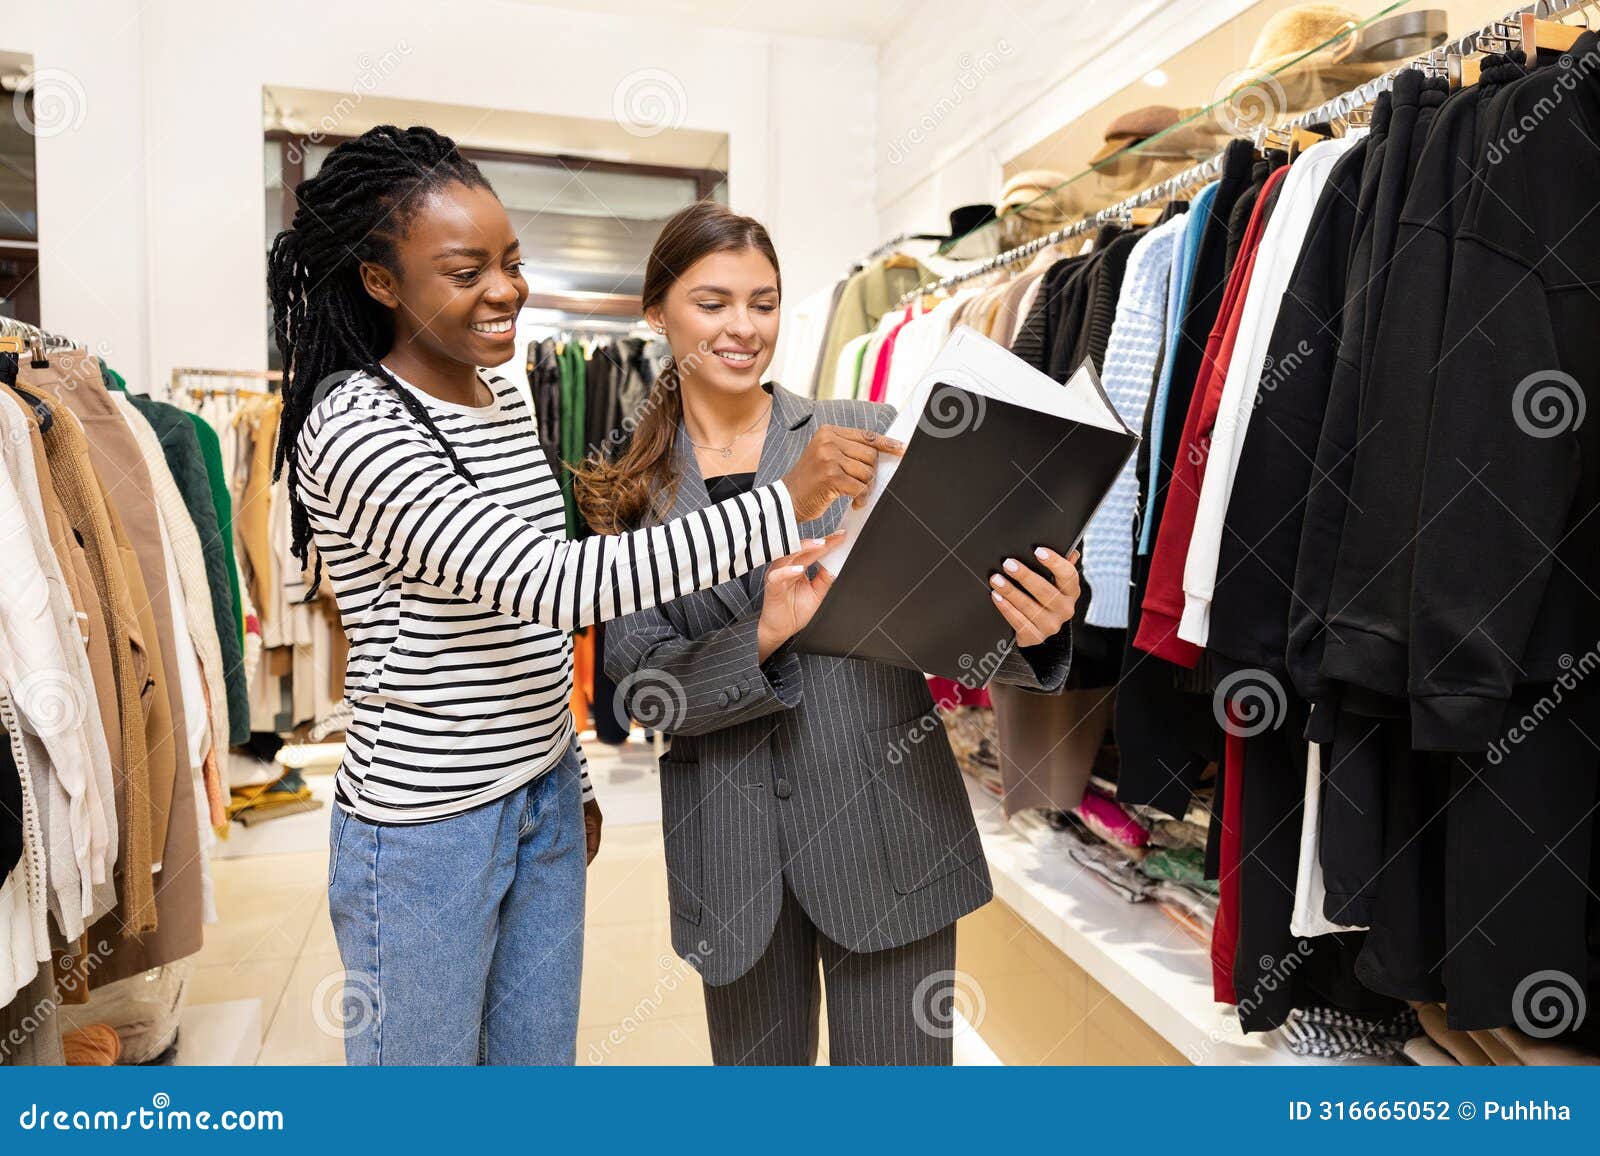 happy woman shopping with consultant in a fashion store